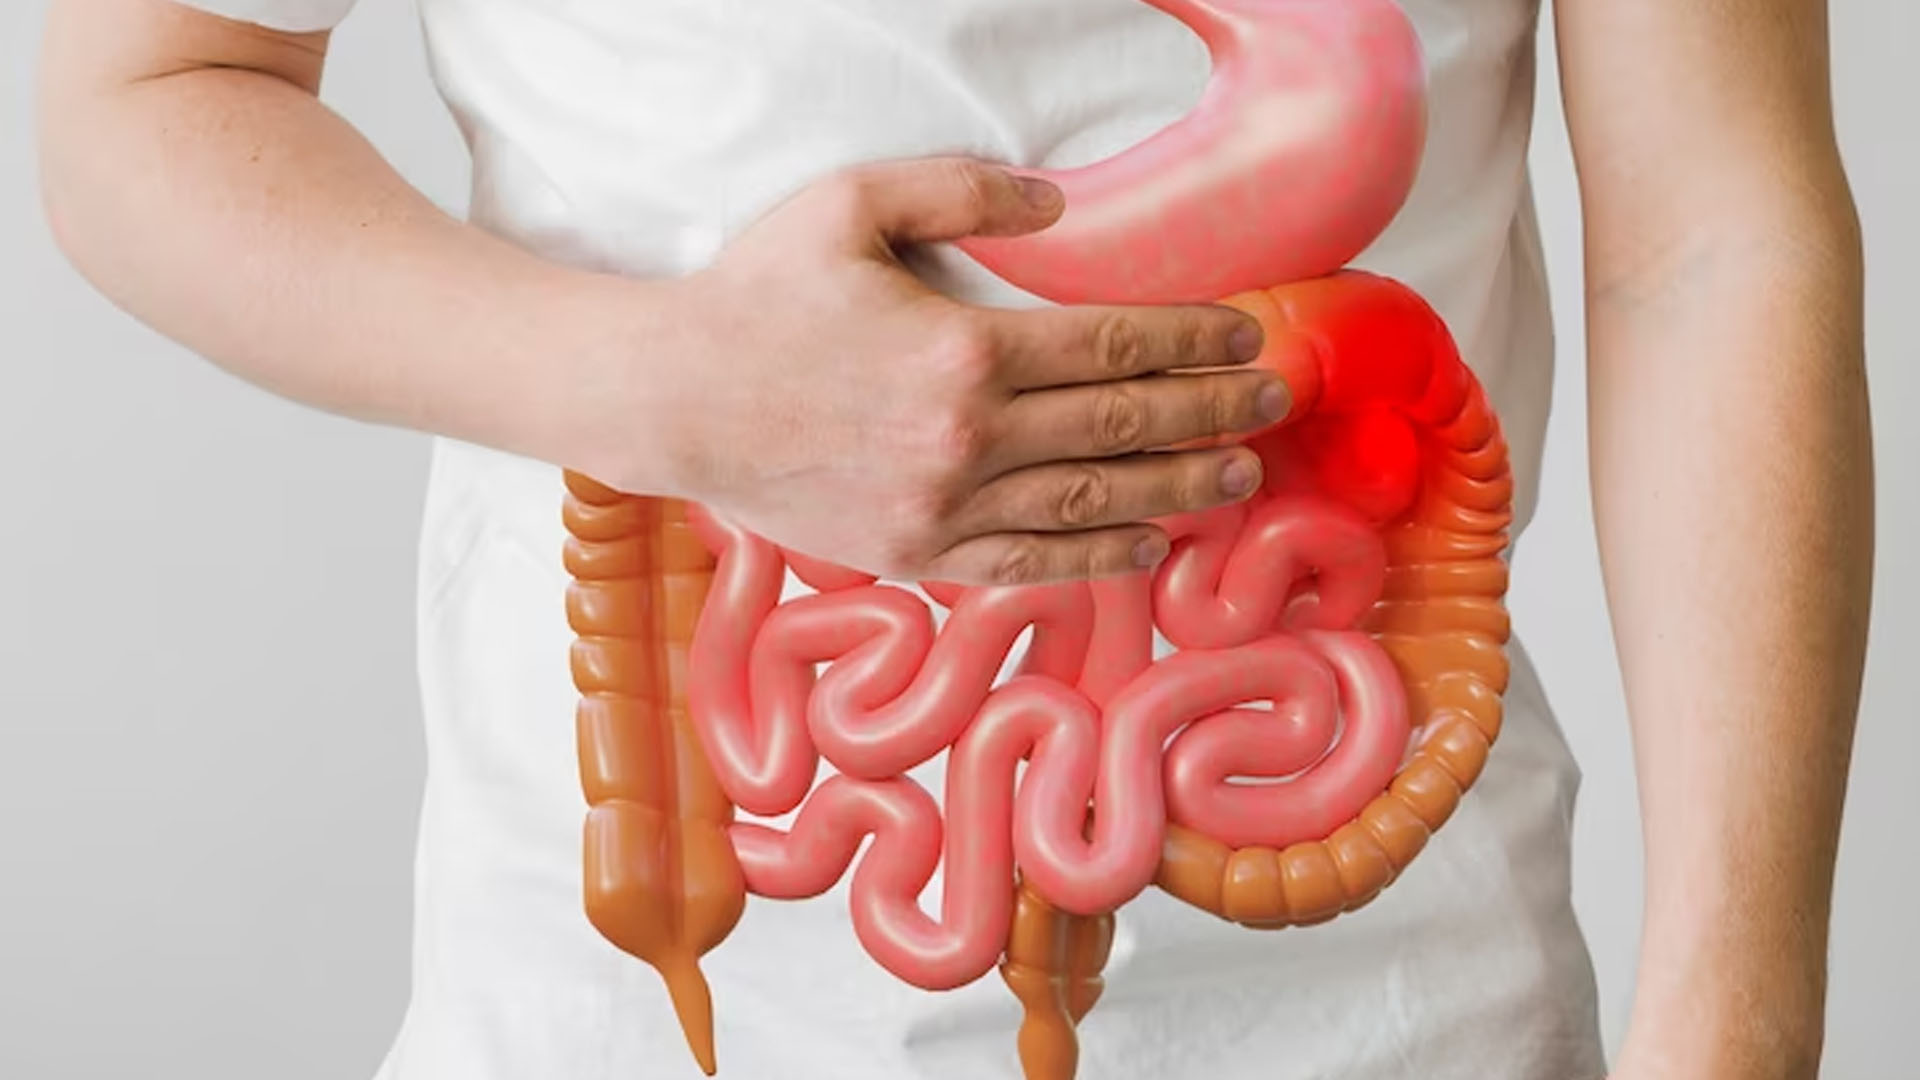 What are the Home Remedies for Ulcerative Colitis?